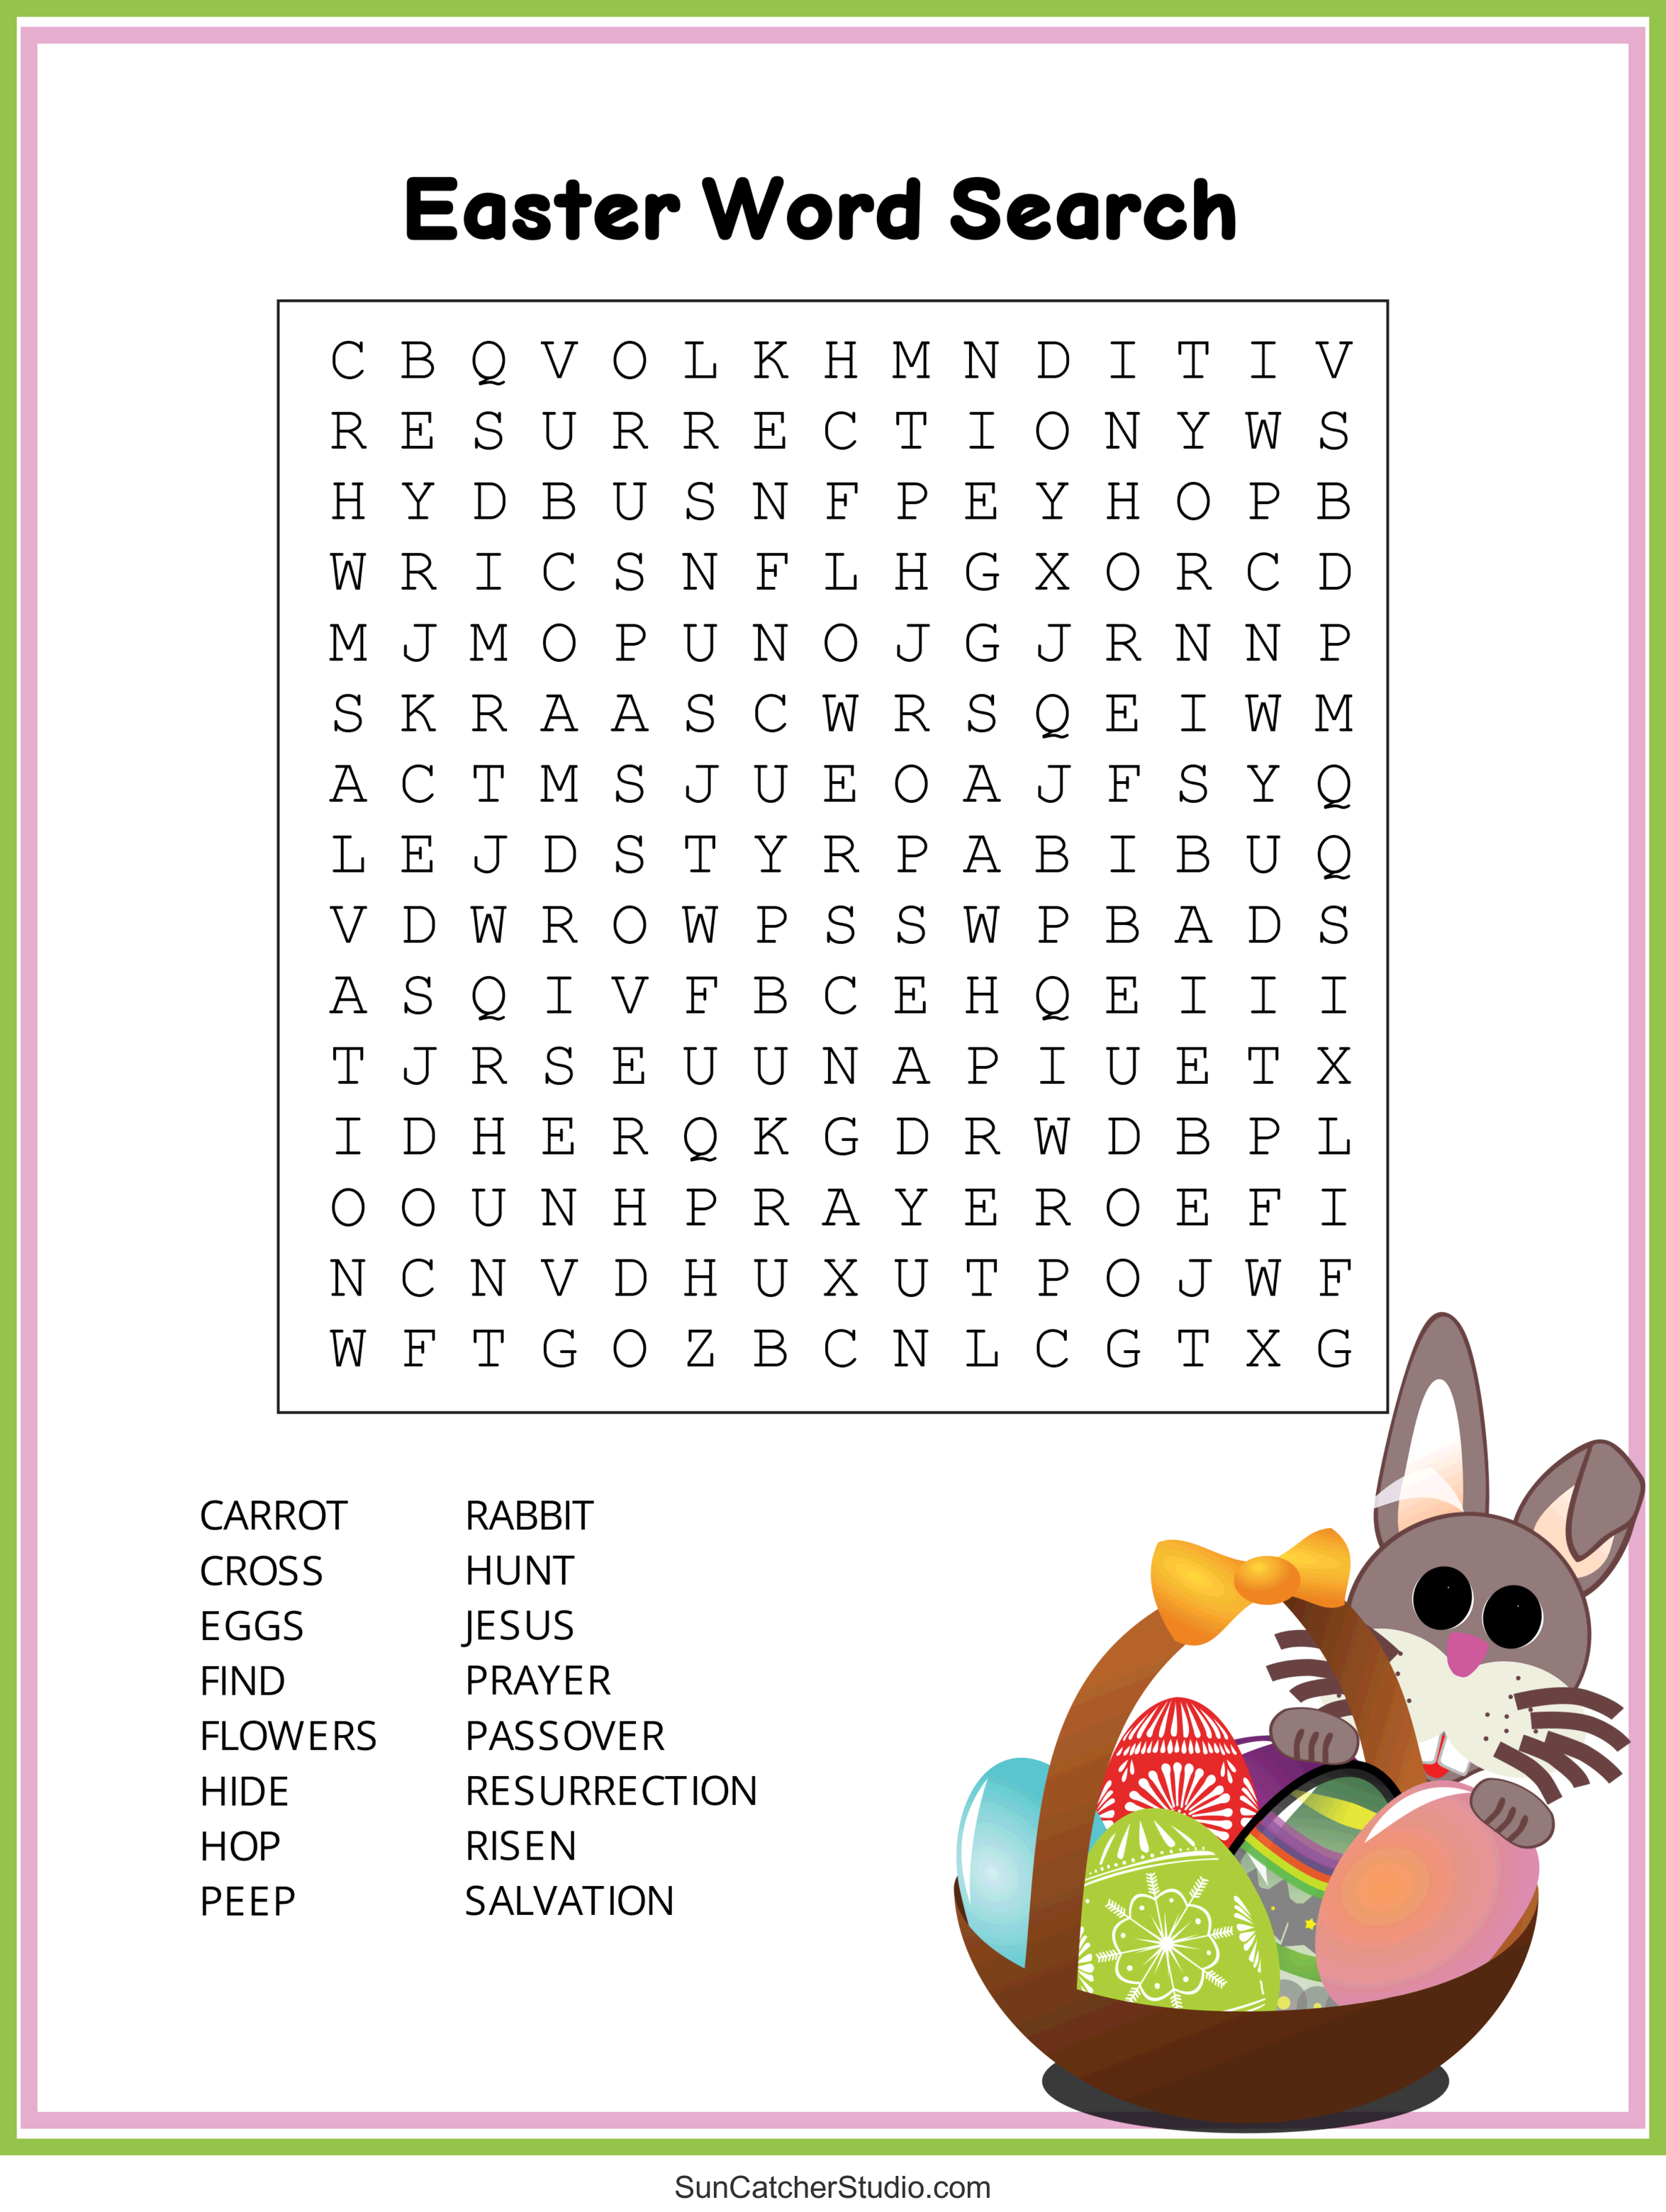 Easter Word Search Free Printable PDF Puzzles DIY Projects 